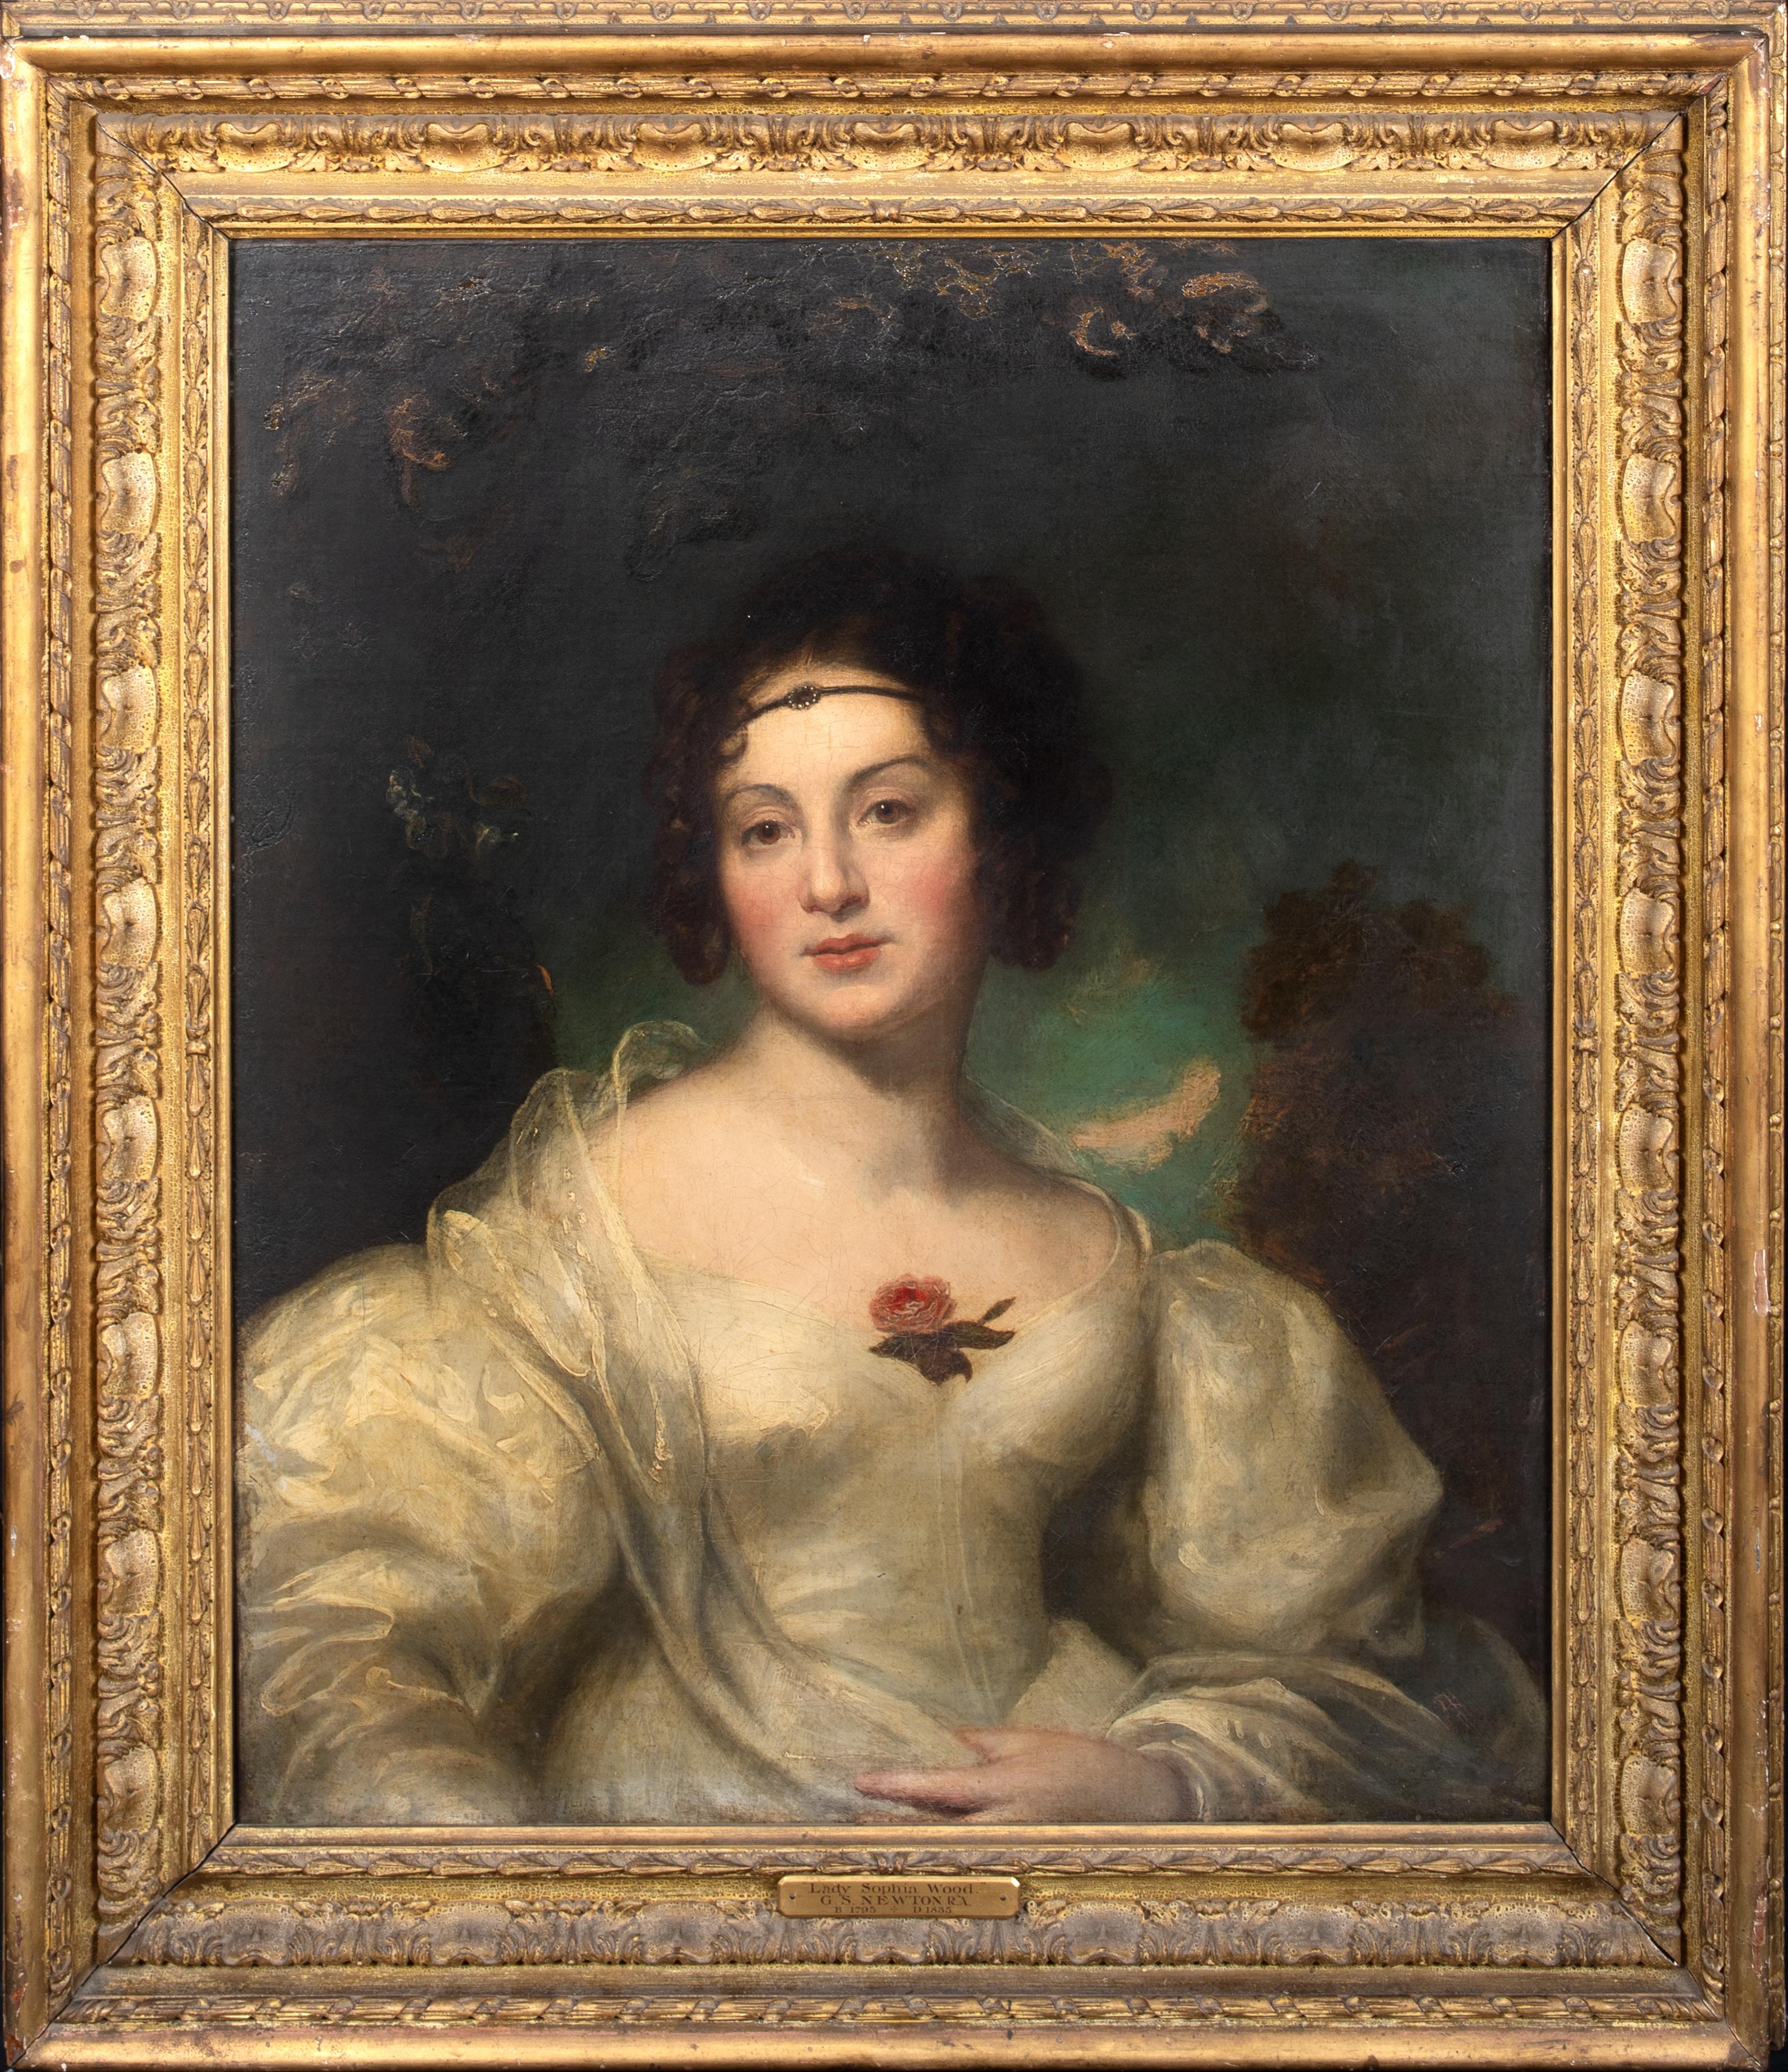 Portrait Of Lady Sophia Wood (1795-1835), 19th Century

by Gilbert Stuart Newton (1794-1835)

Large 19th Century portrait of Lady Sophia Wood, oil on canvas by Gilbert Stuart Wood. Good quality and condition portrait of Lady Wood in a white dress